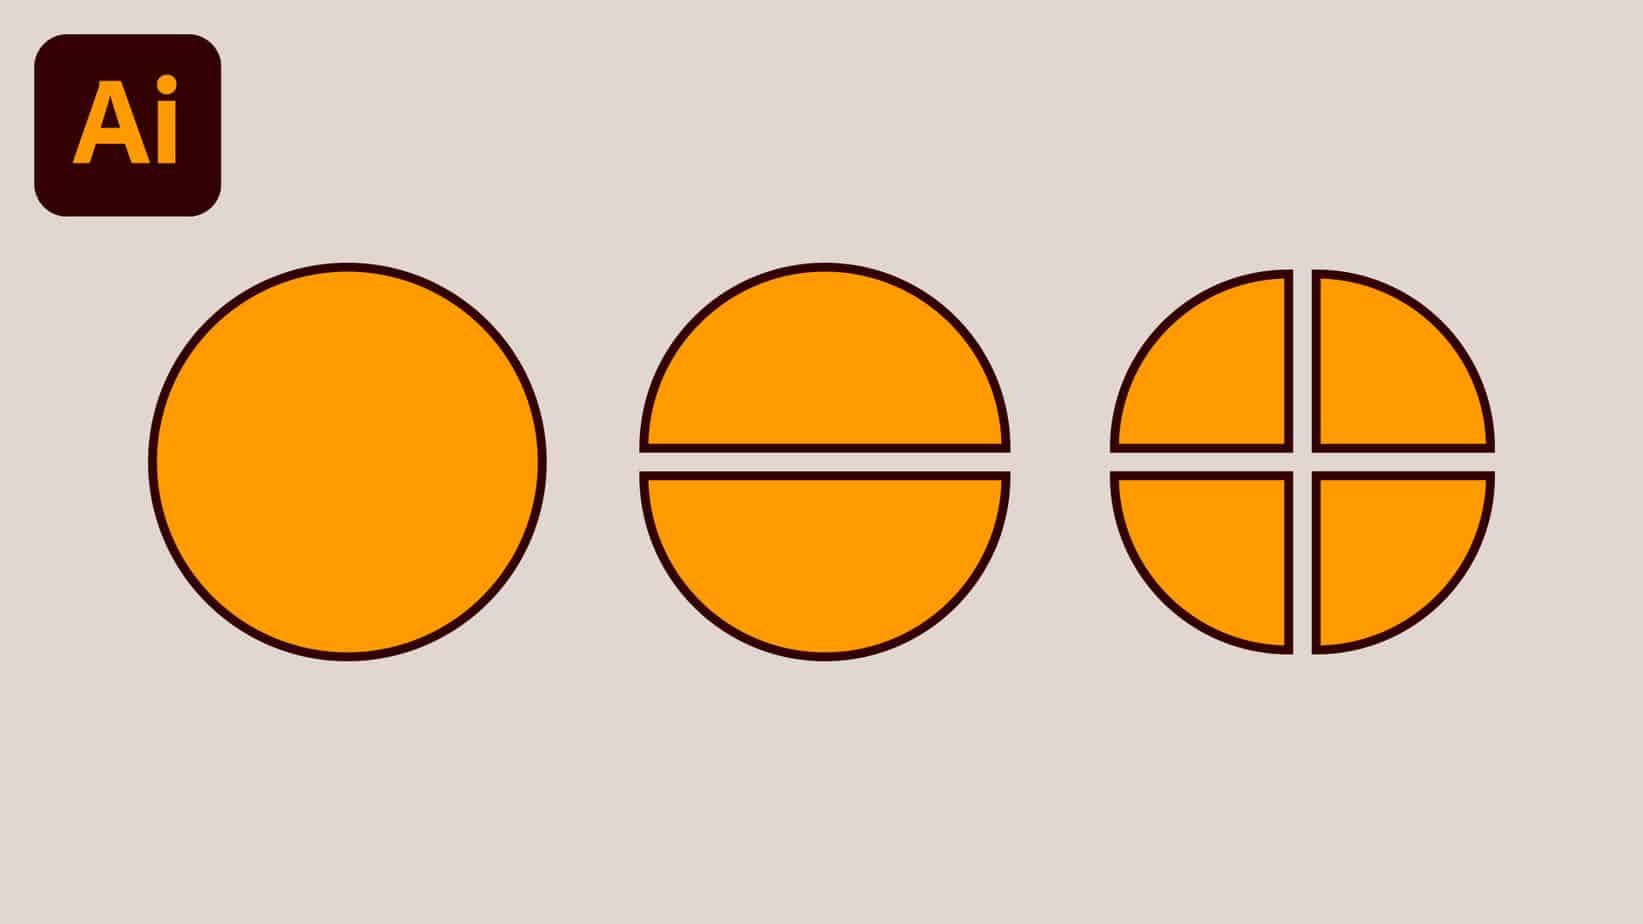 How to Make a Circle in Illustrator